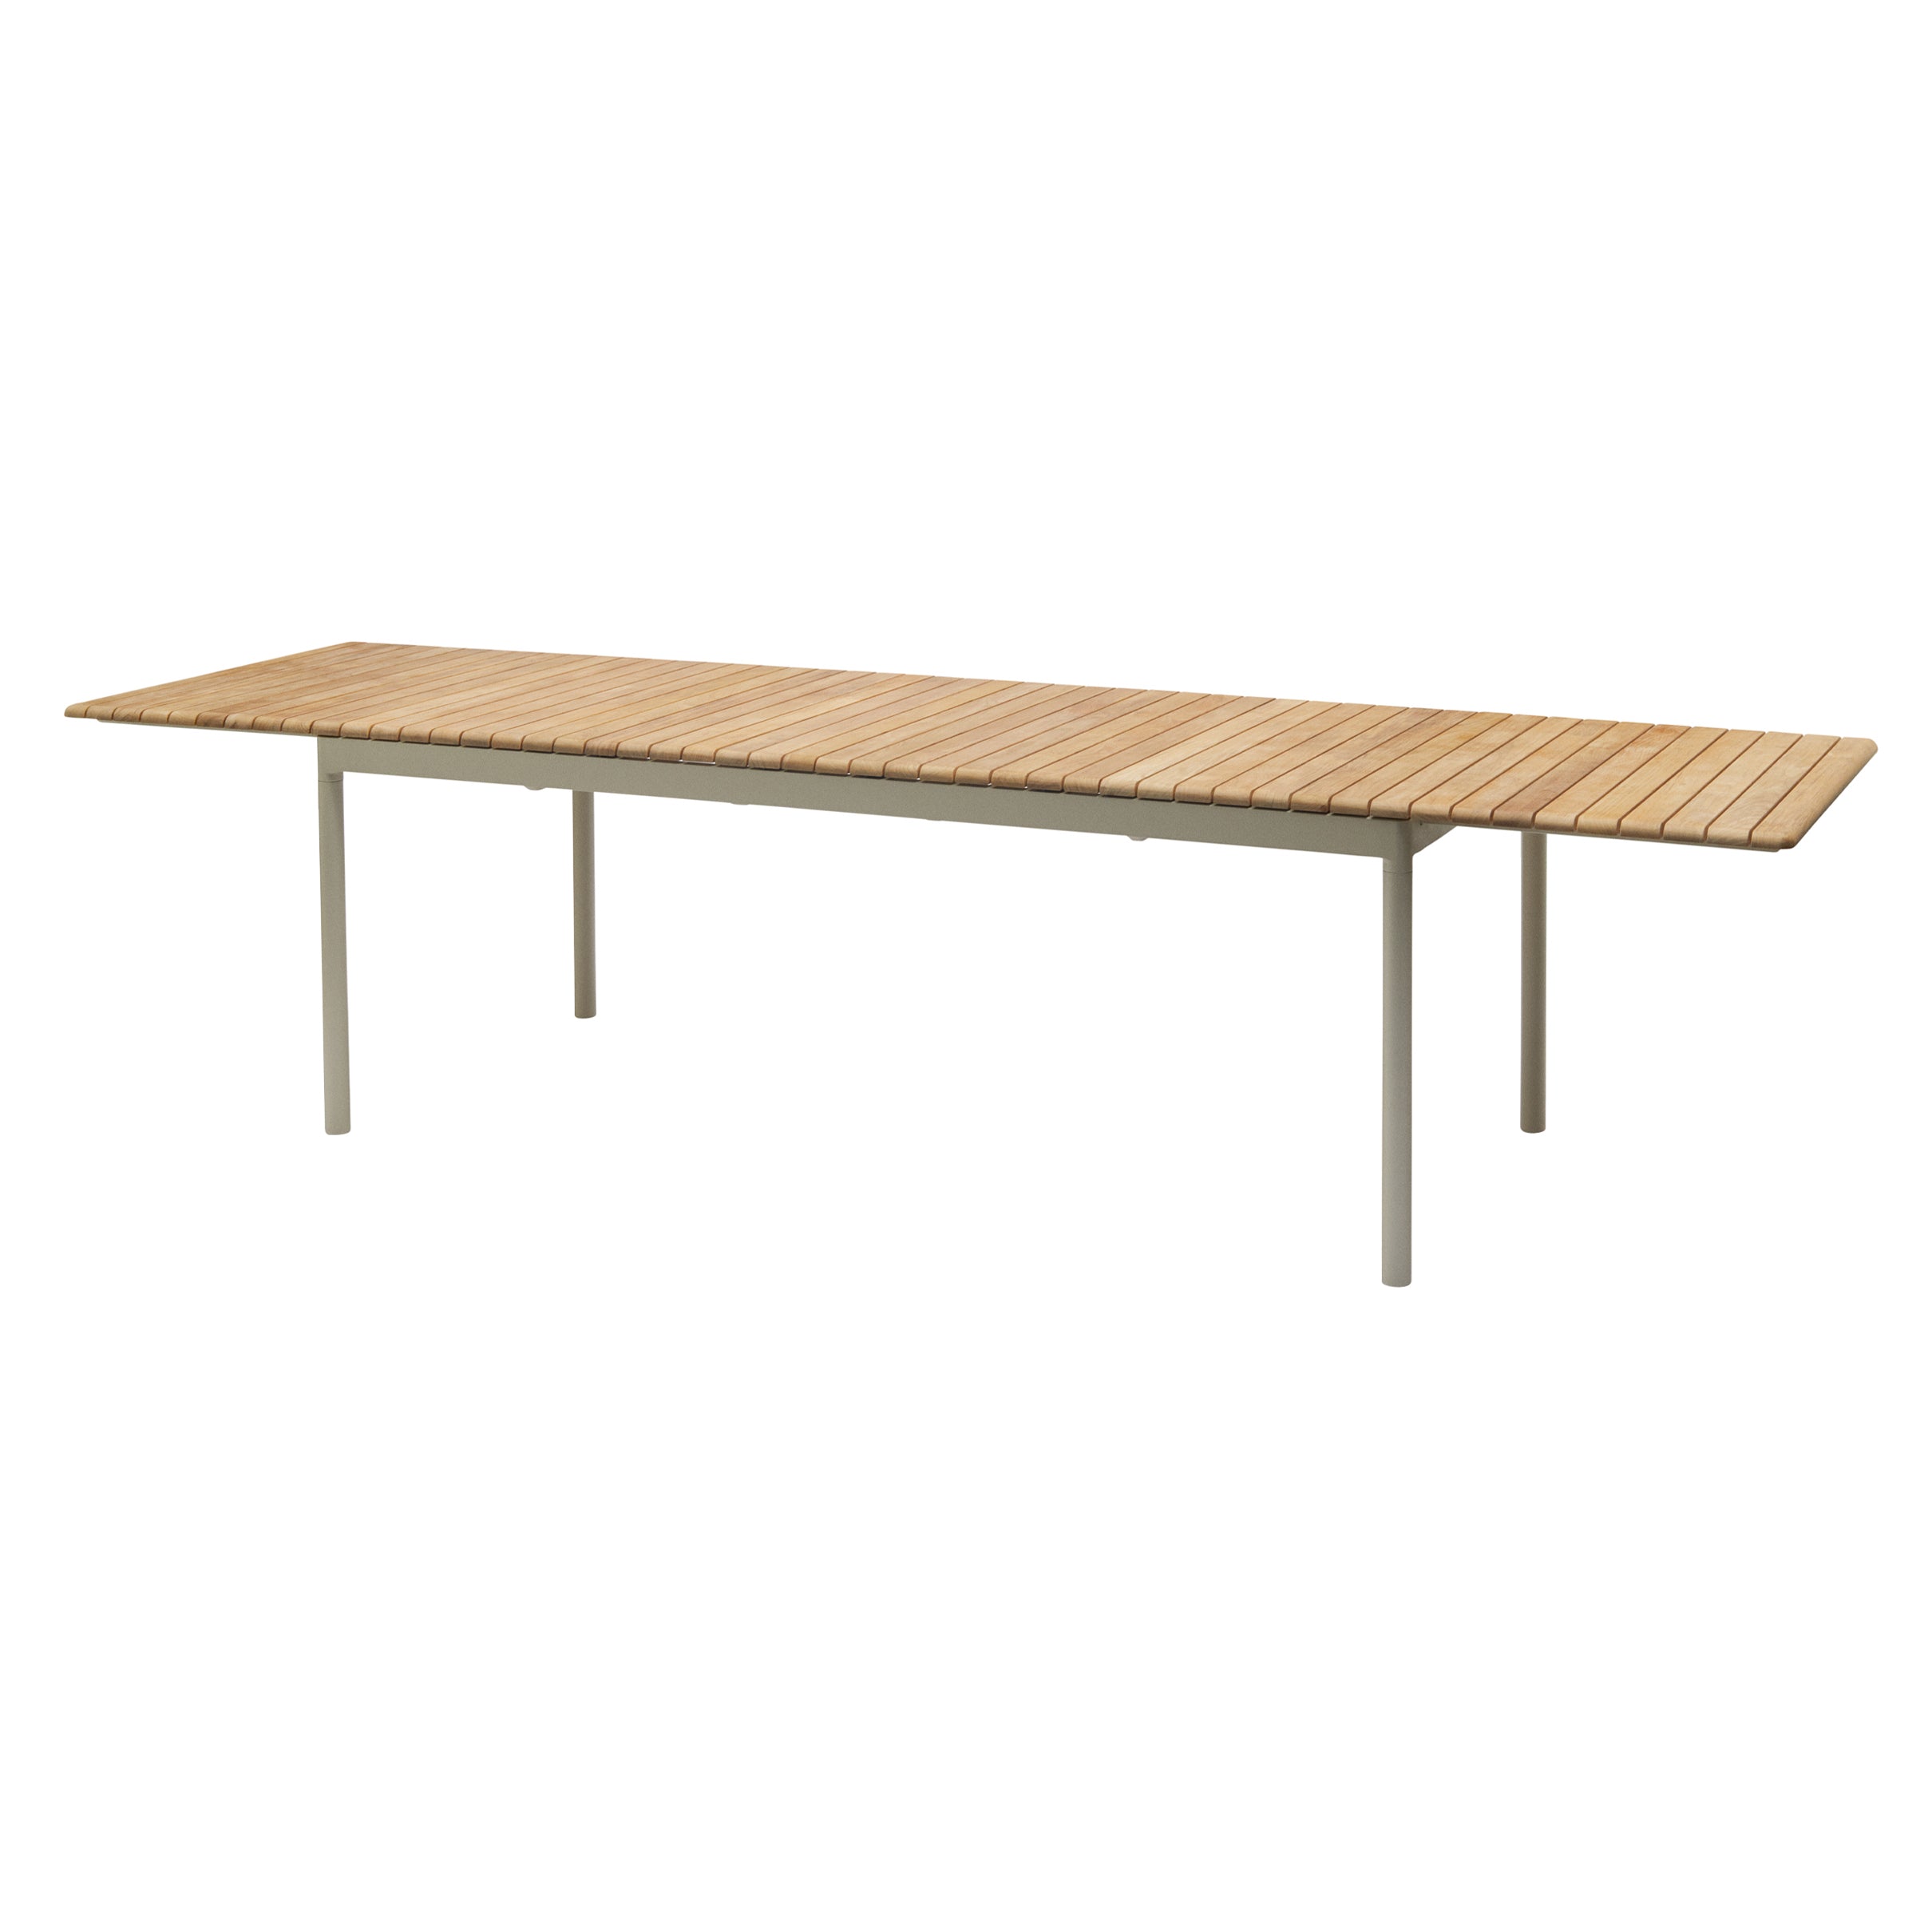 Pelagus Table: Light Ivory + With Four Extension Plate